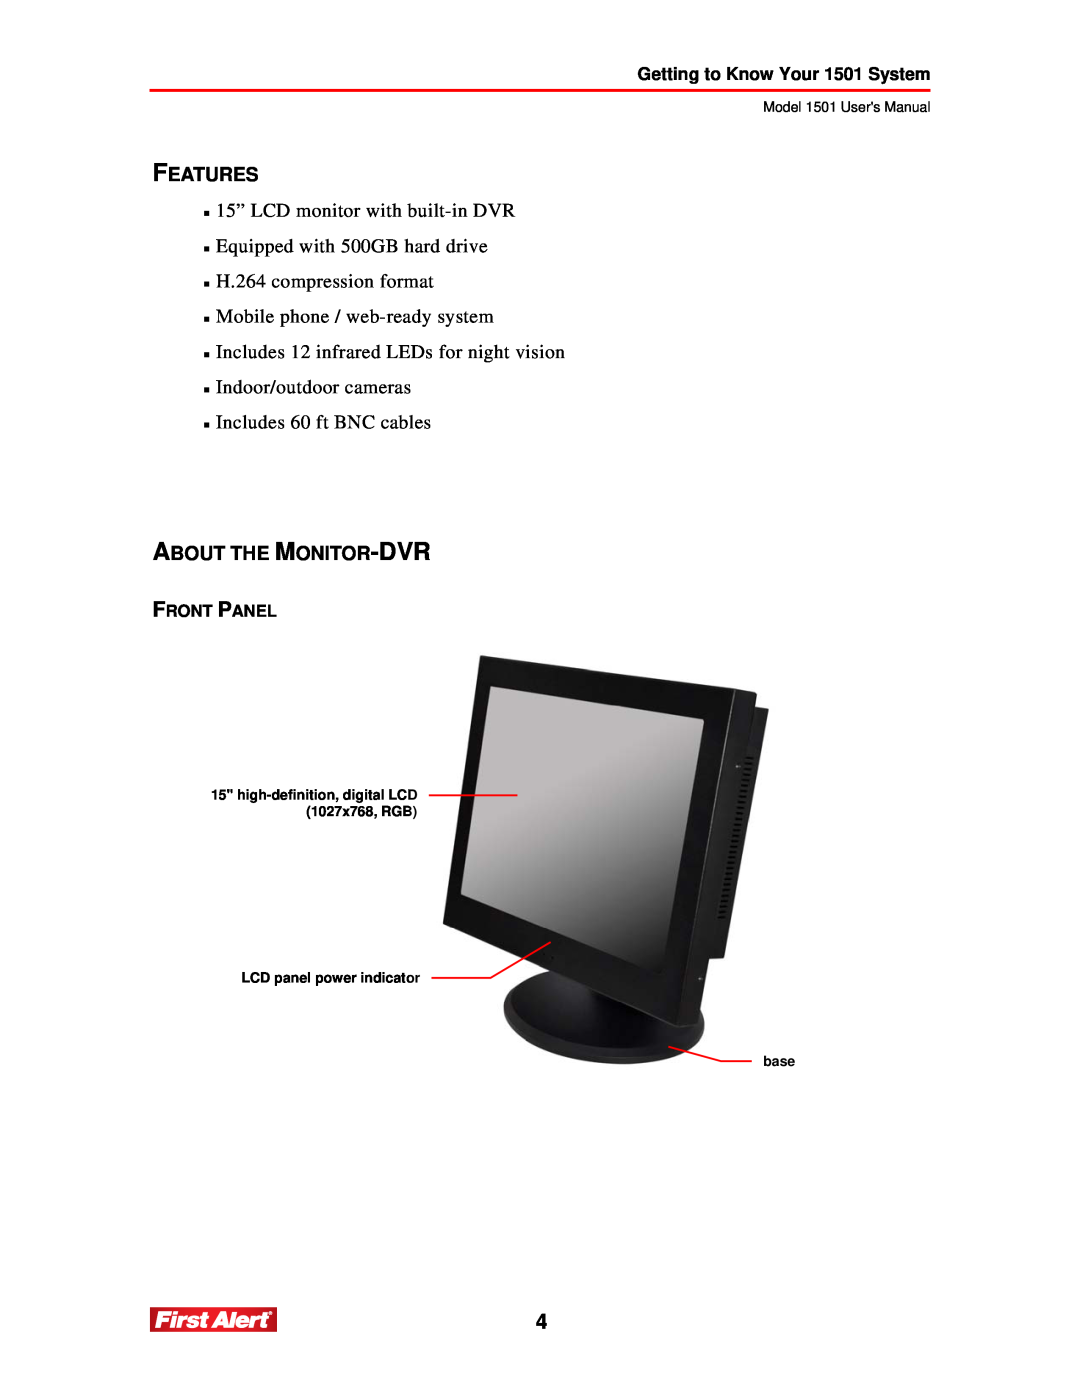 First Alert user manual Features, About The Monitor-Dvr, Getting to Know Your 1501 System, Front Panel 